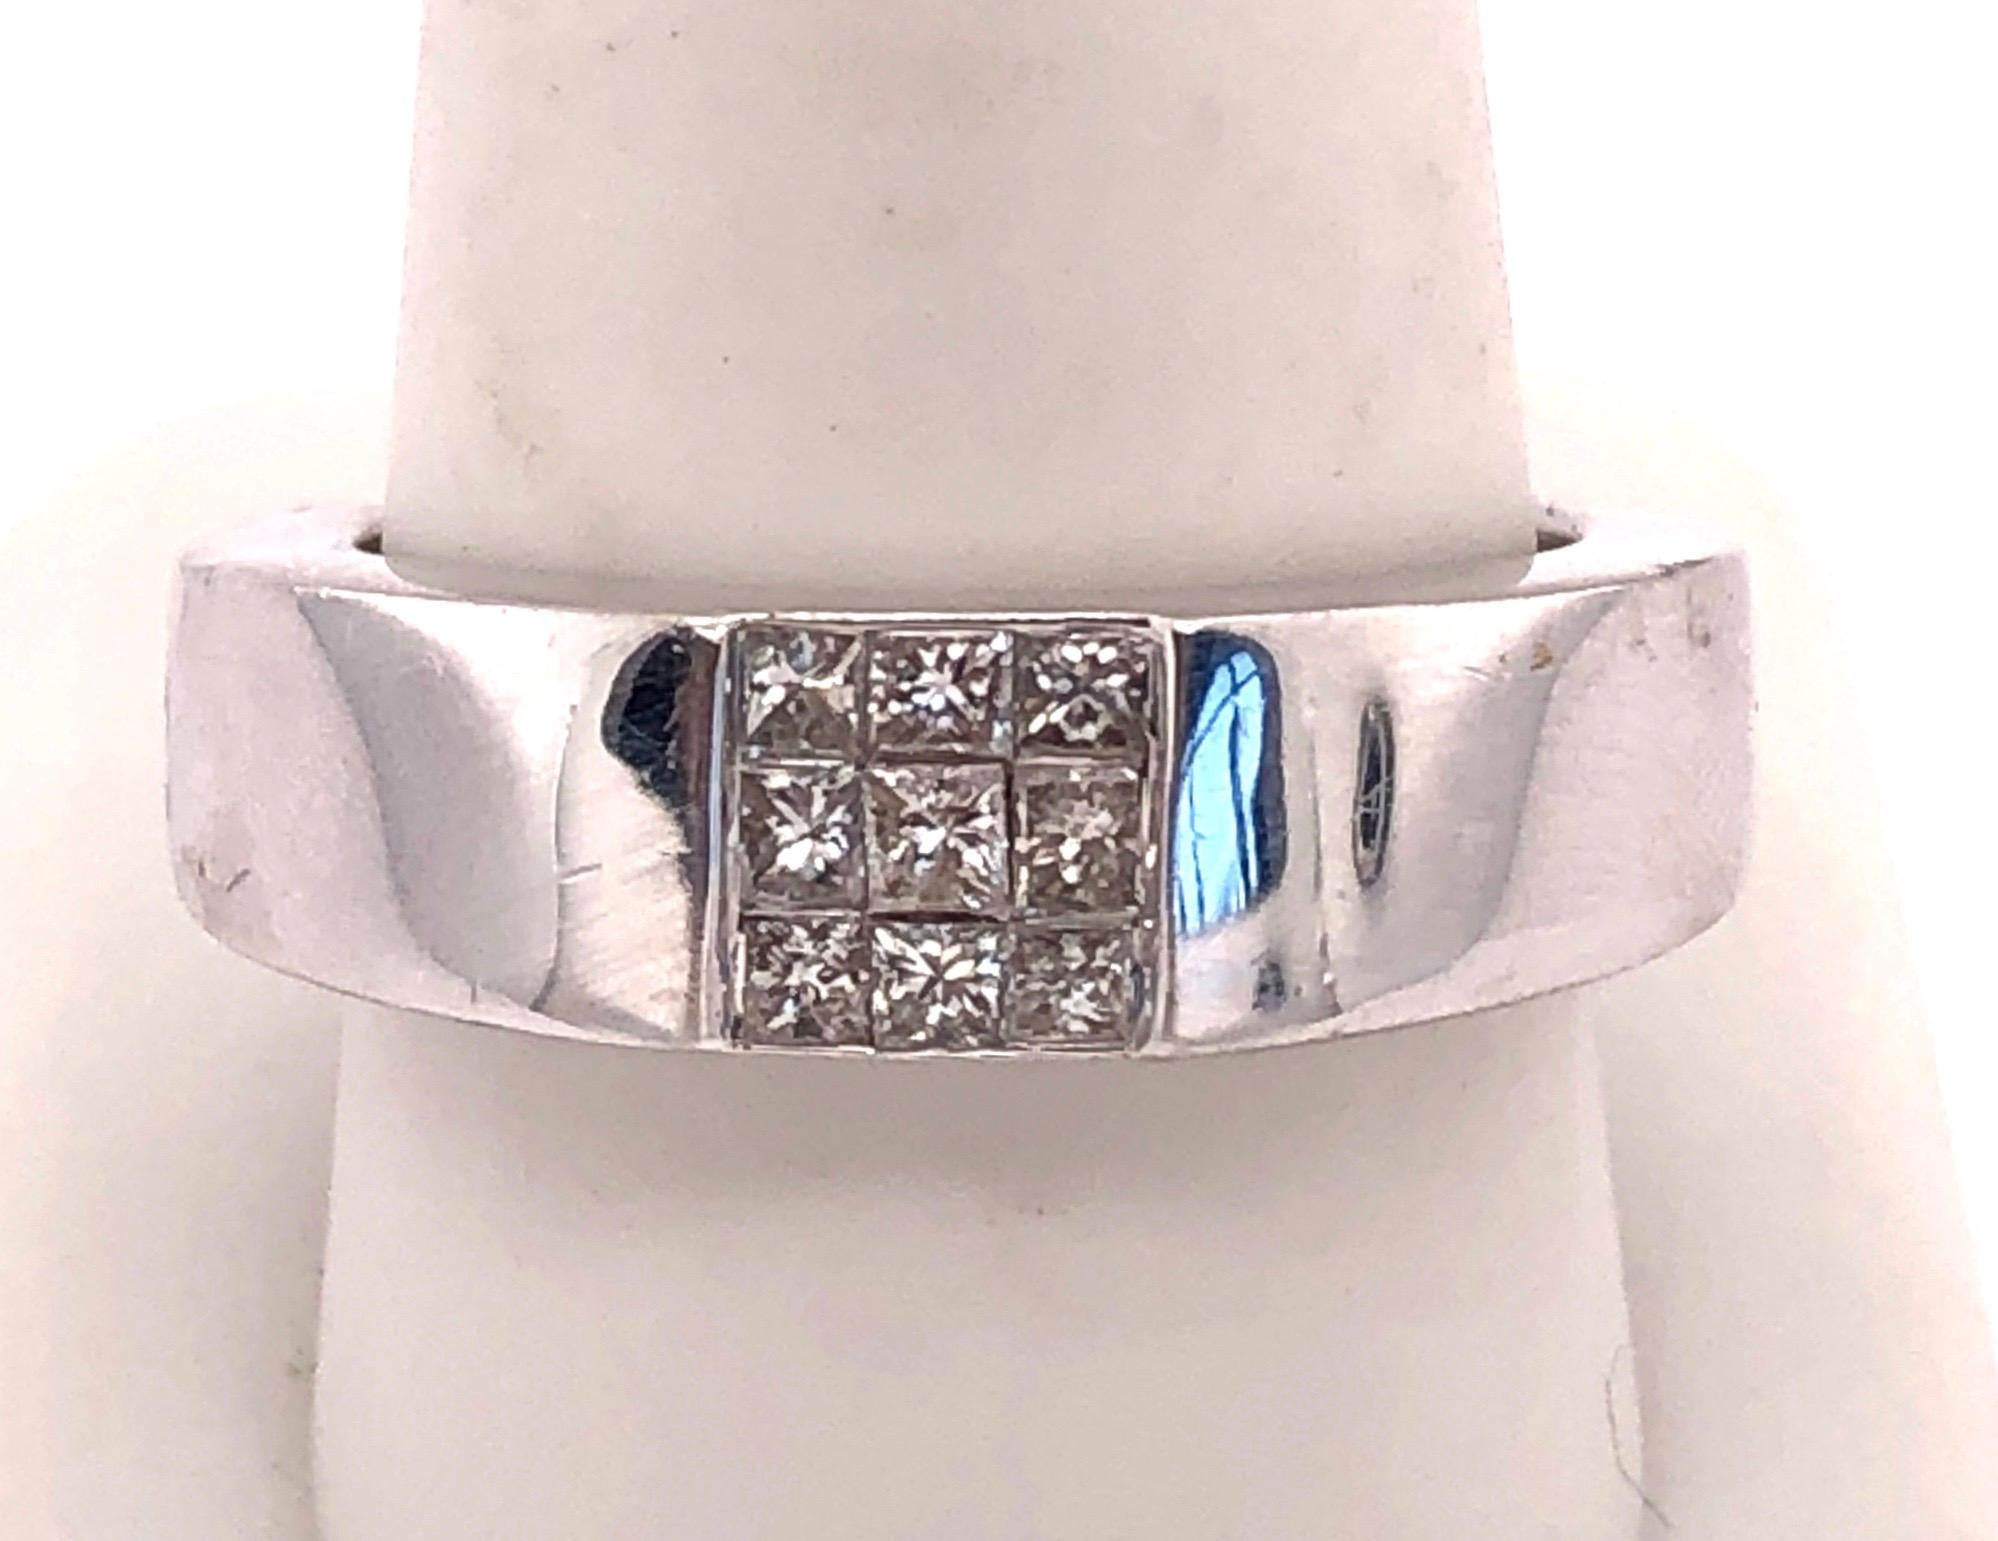 14Kt White Gold Ring Or Wedding Band With Nine Diamond Cluster
Size 10,  0.50 Total diamond weight. 11.50 grams total weight